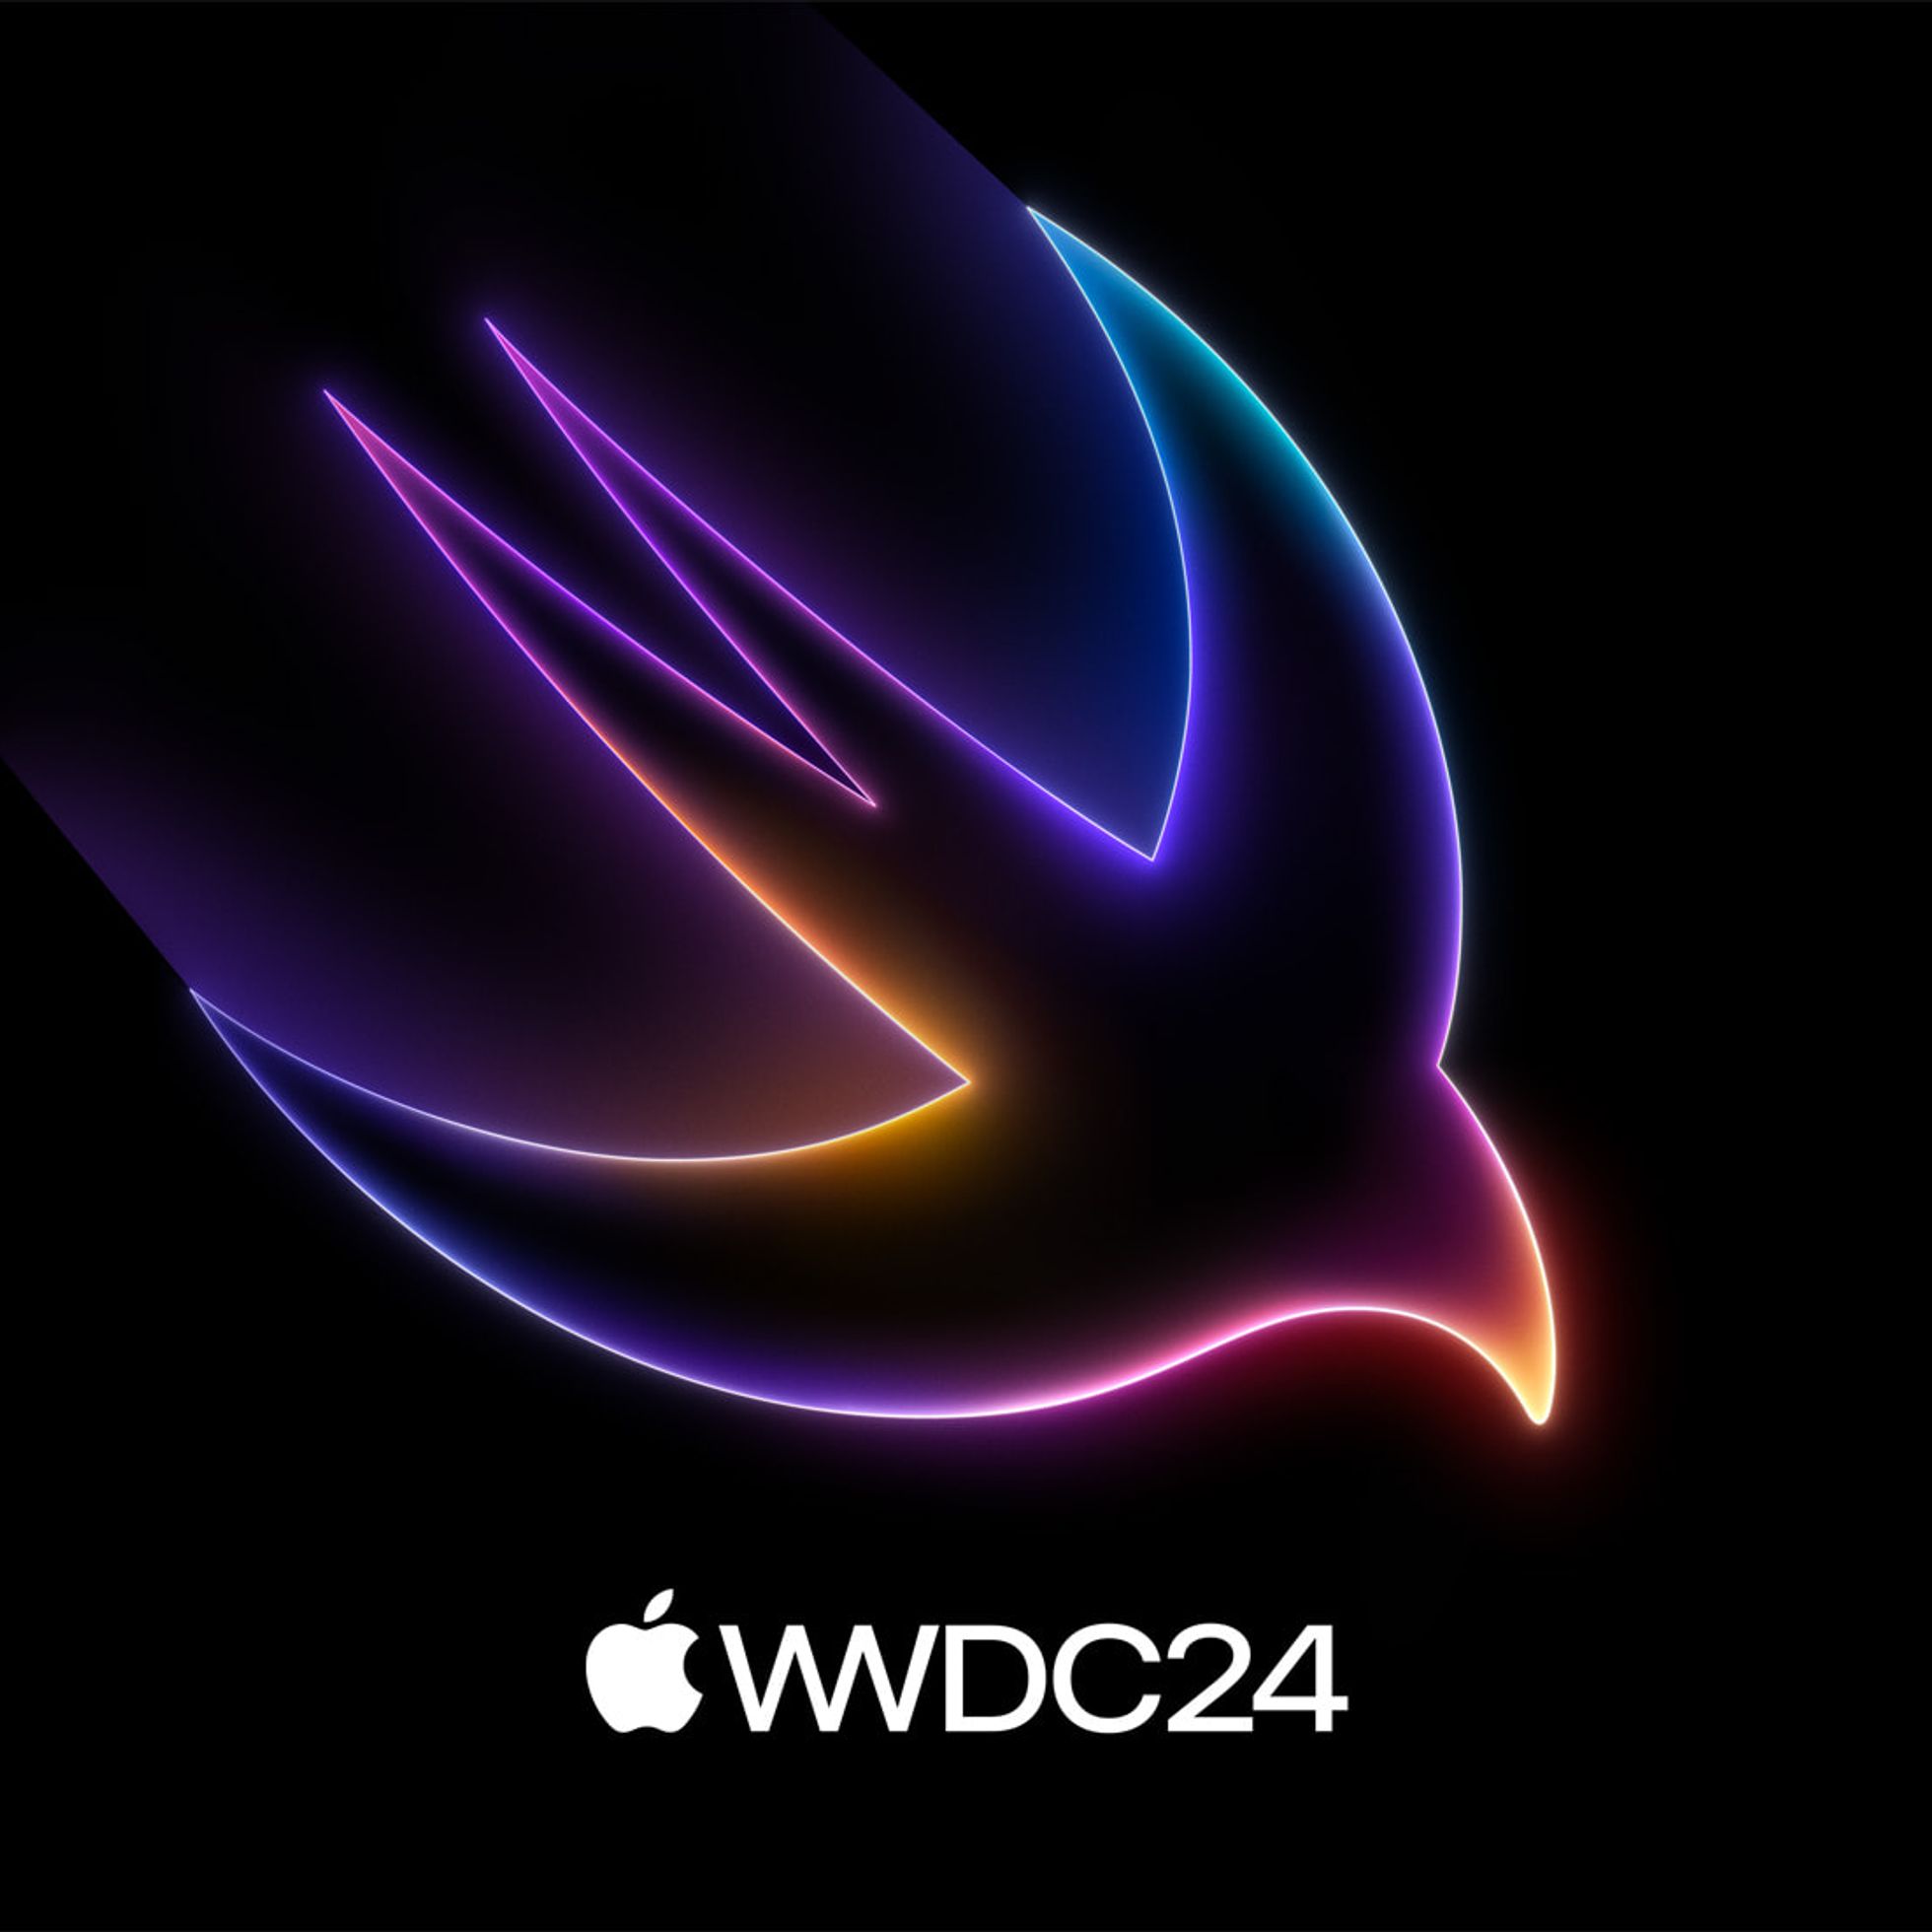 Apple reveals exciting updates for iOS, iPadOS, macOS, and more at WWDC24